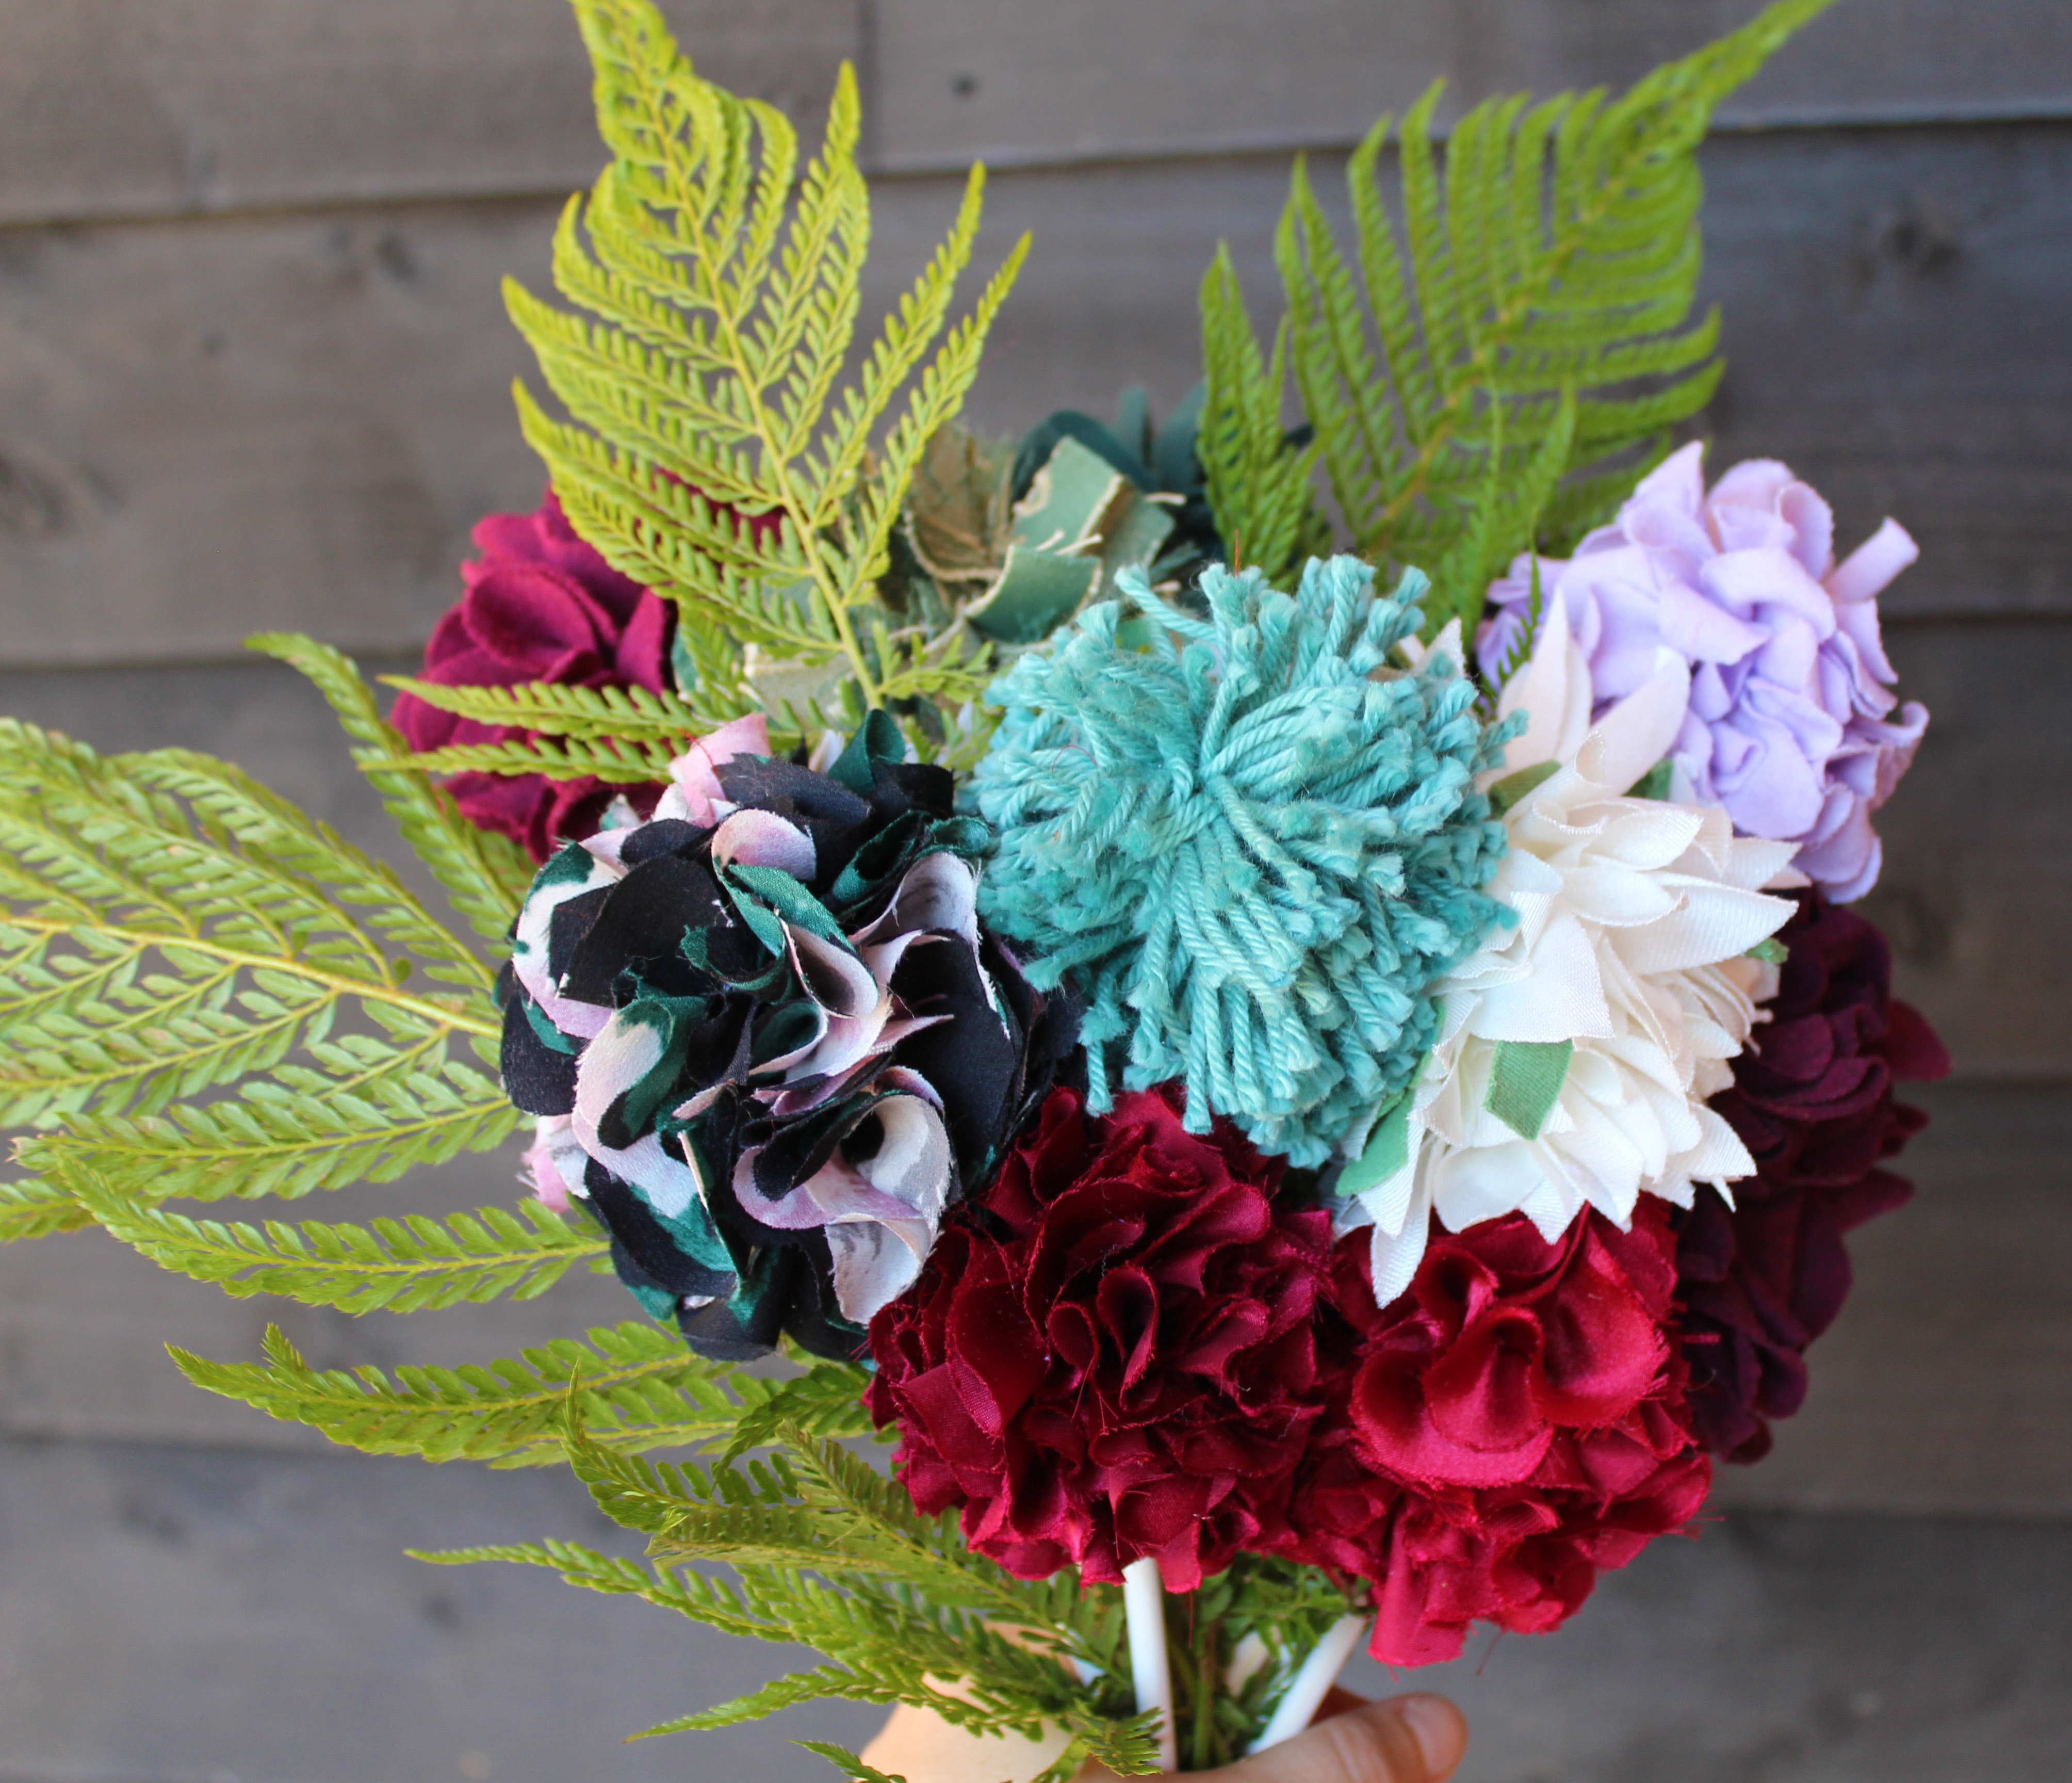 Bunch of fabric flowers made using sewing offcuts